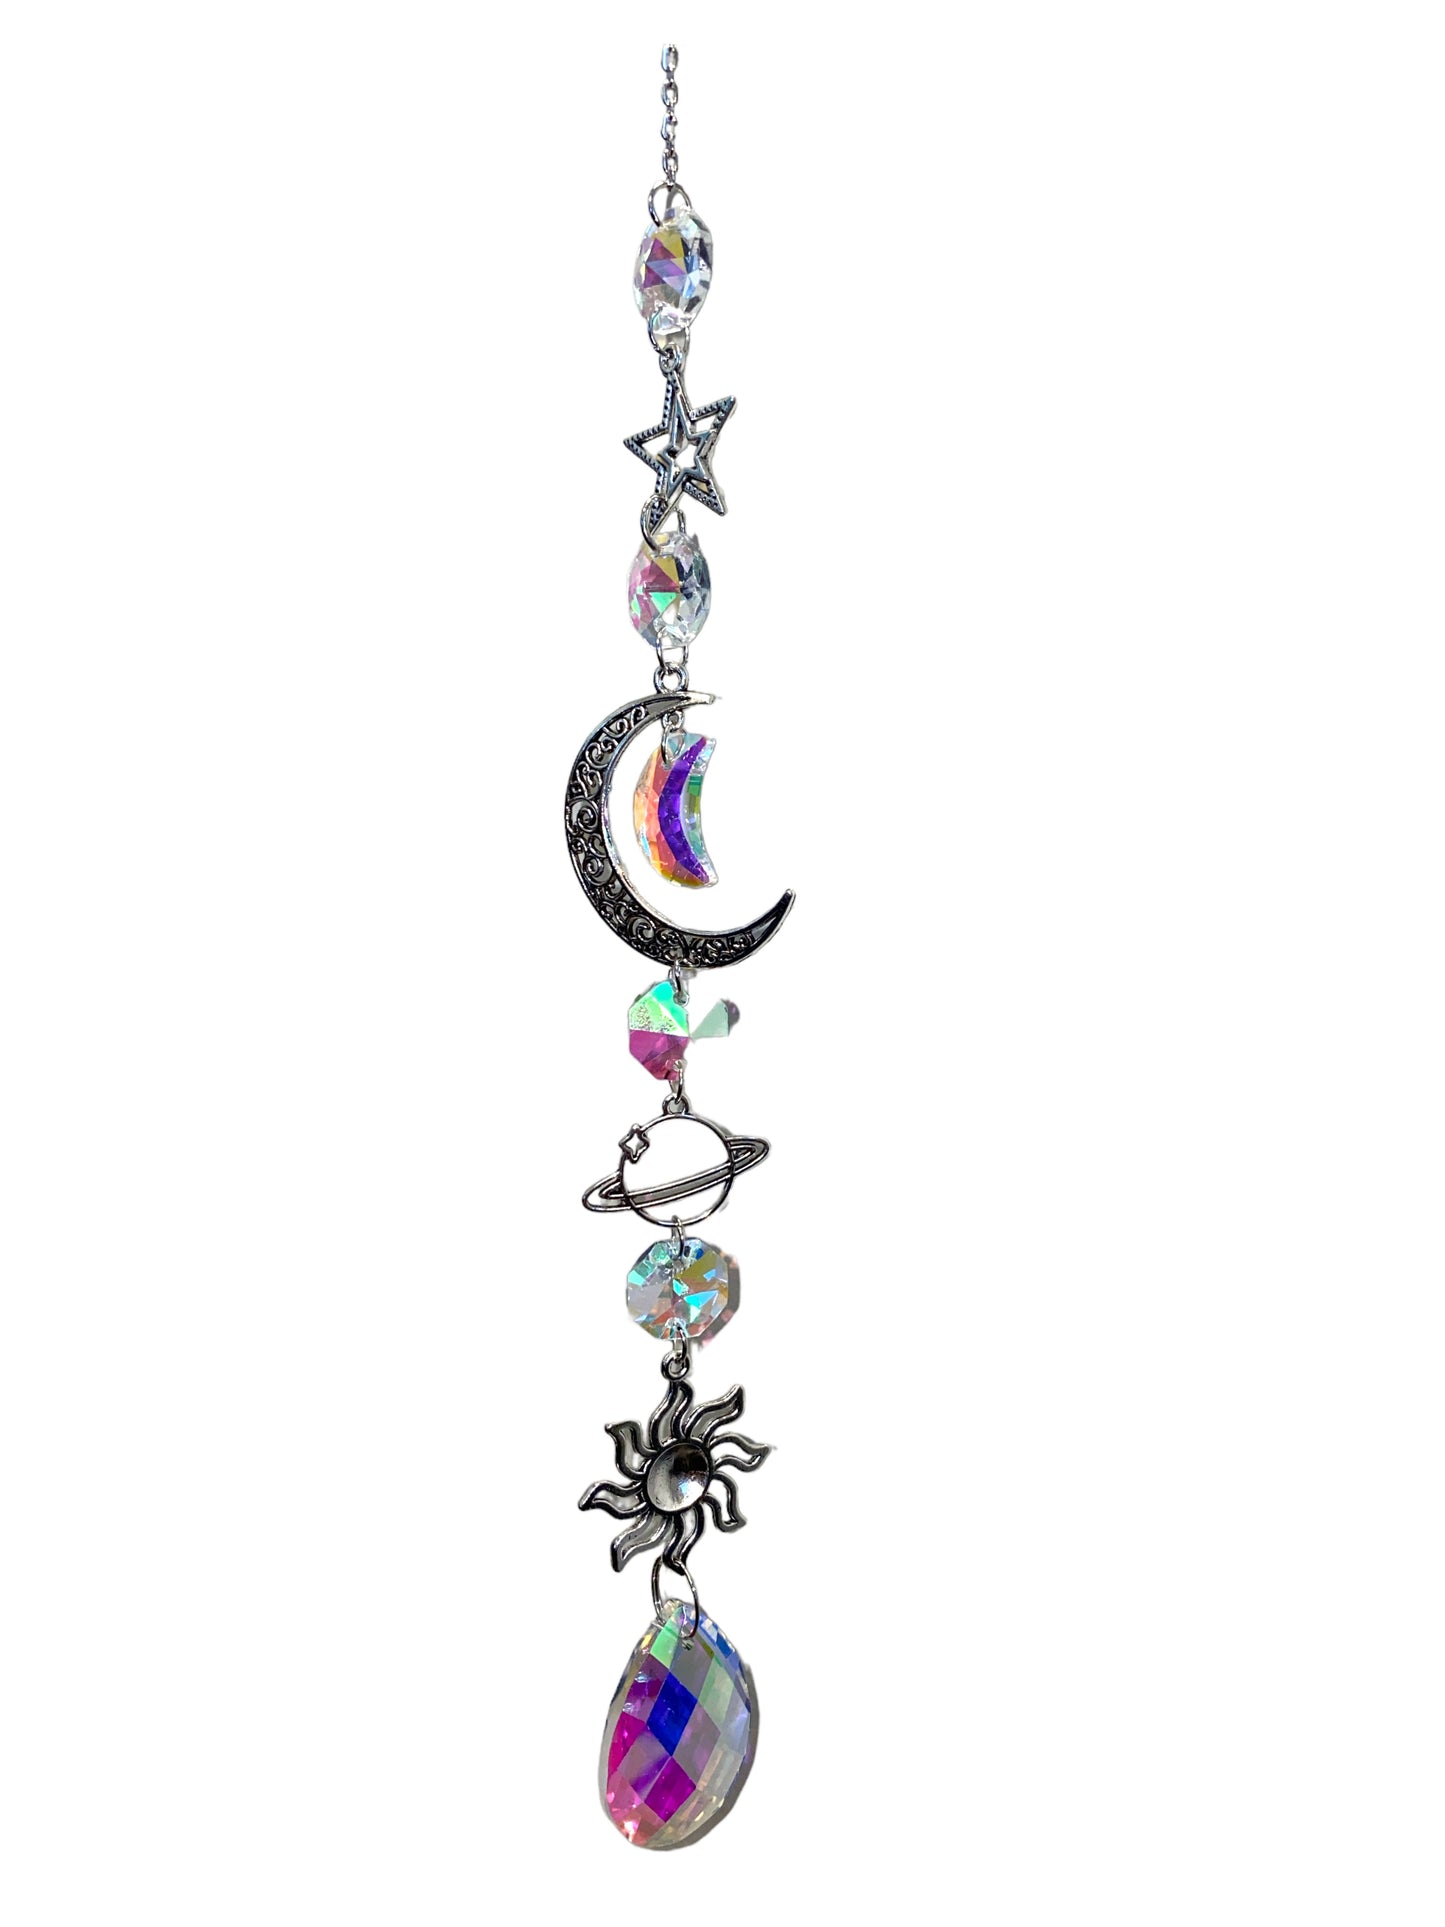 K9 Crystal Silver Color Twinkle Hanger with Moon & Stars - Long - 6cm x 40cm - China - NEW123